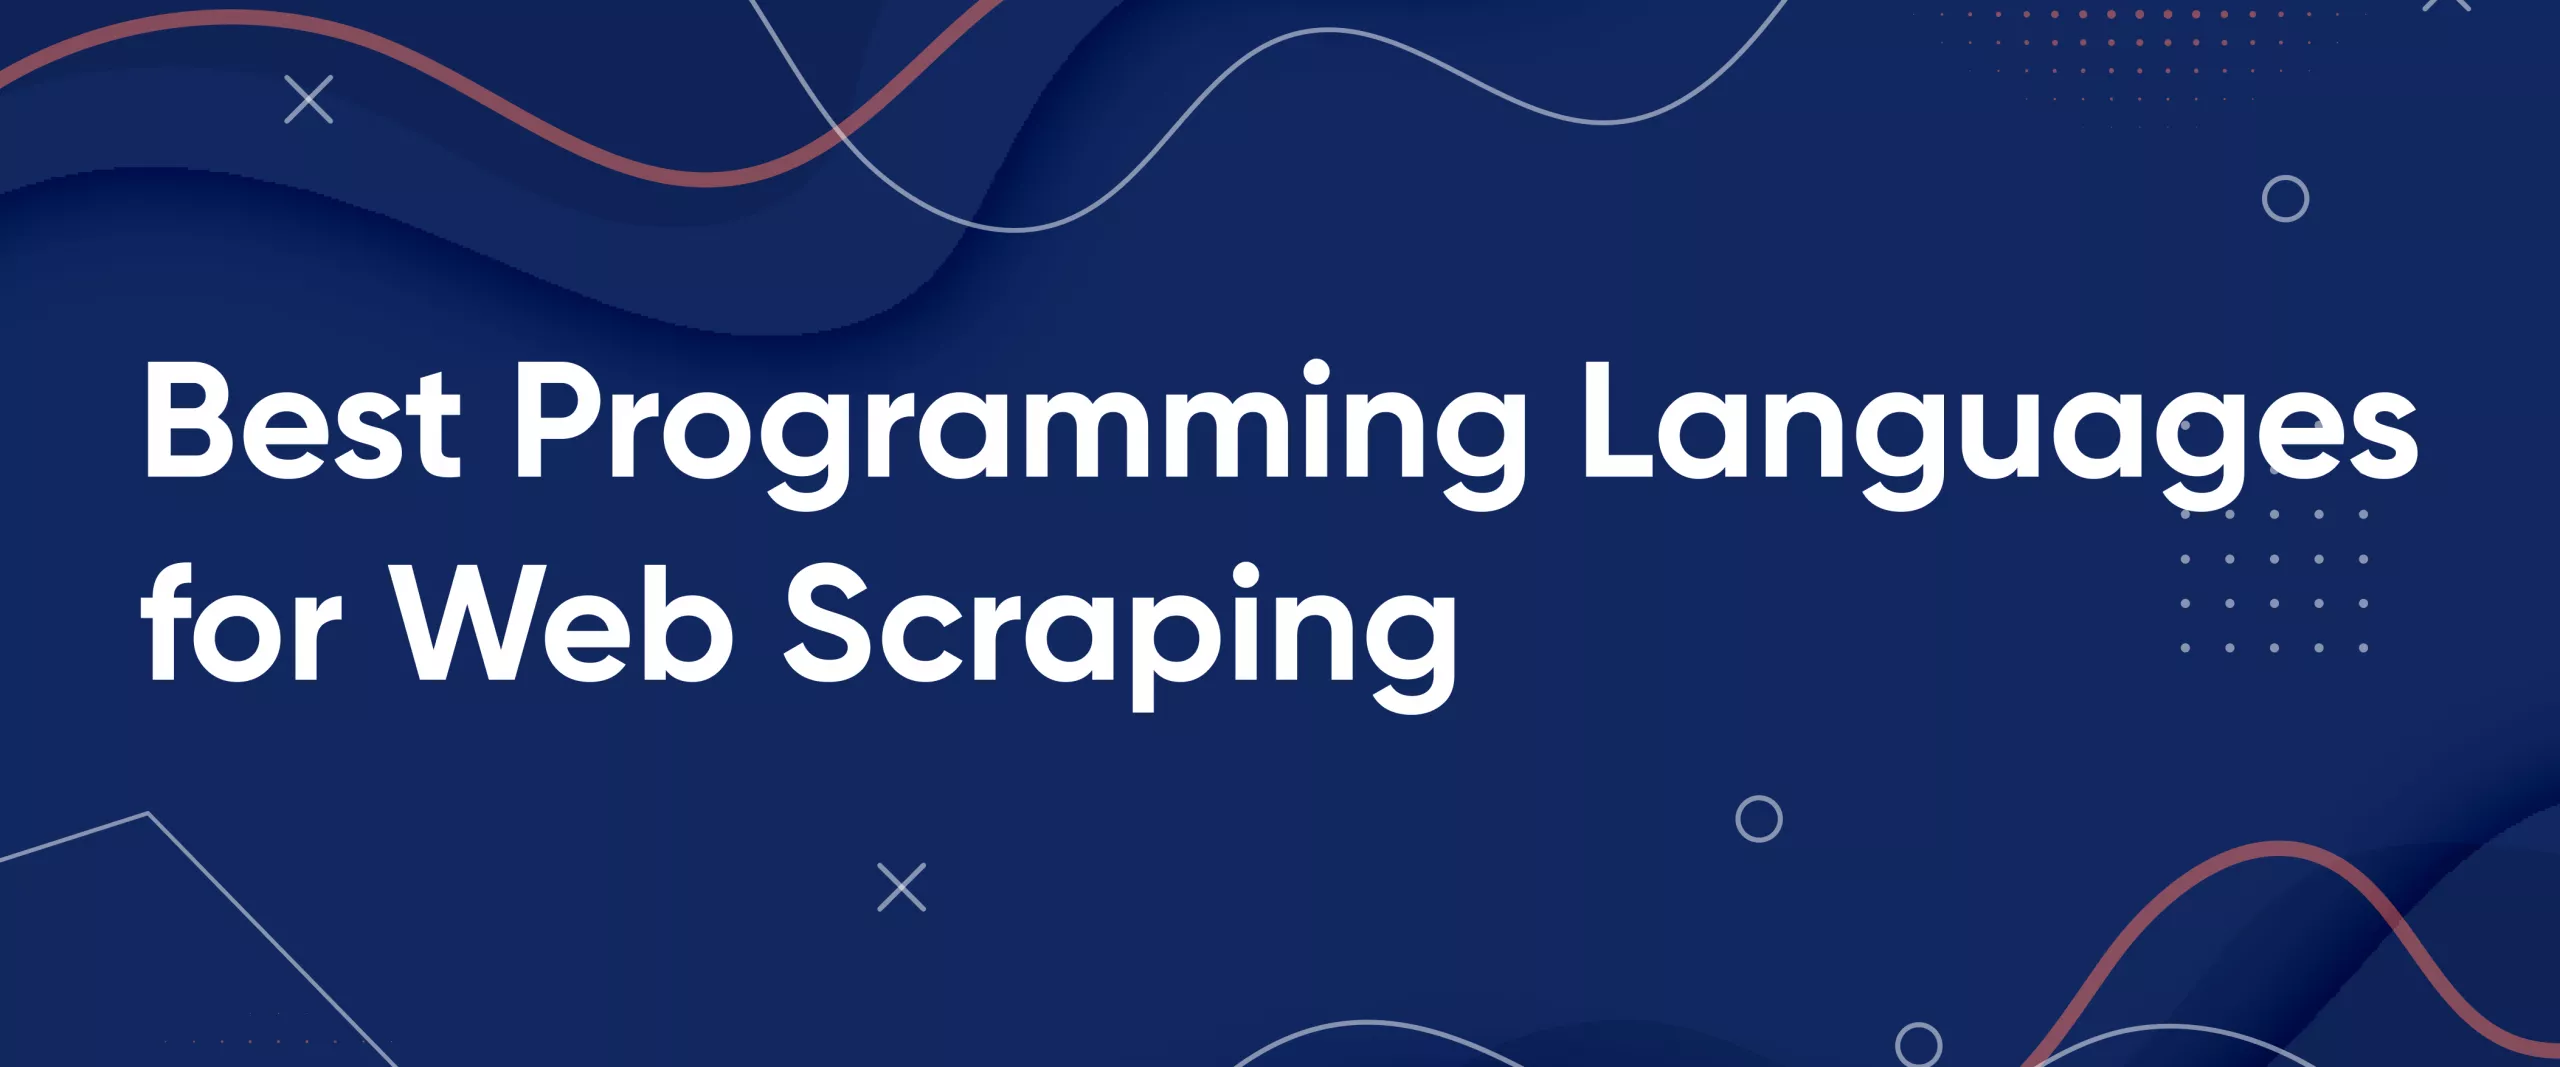 The Best Programming Languages for Web Scraping